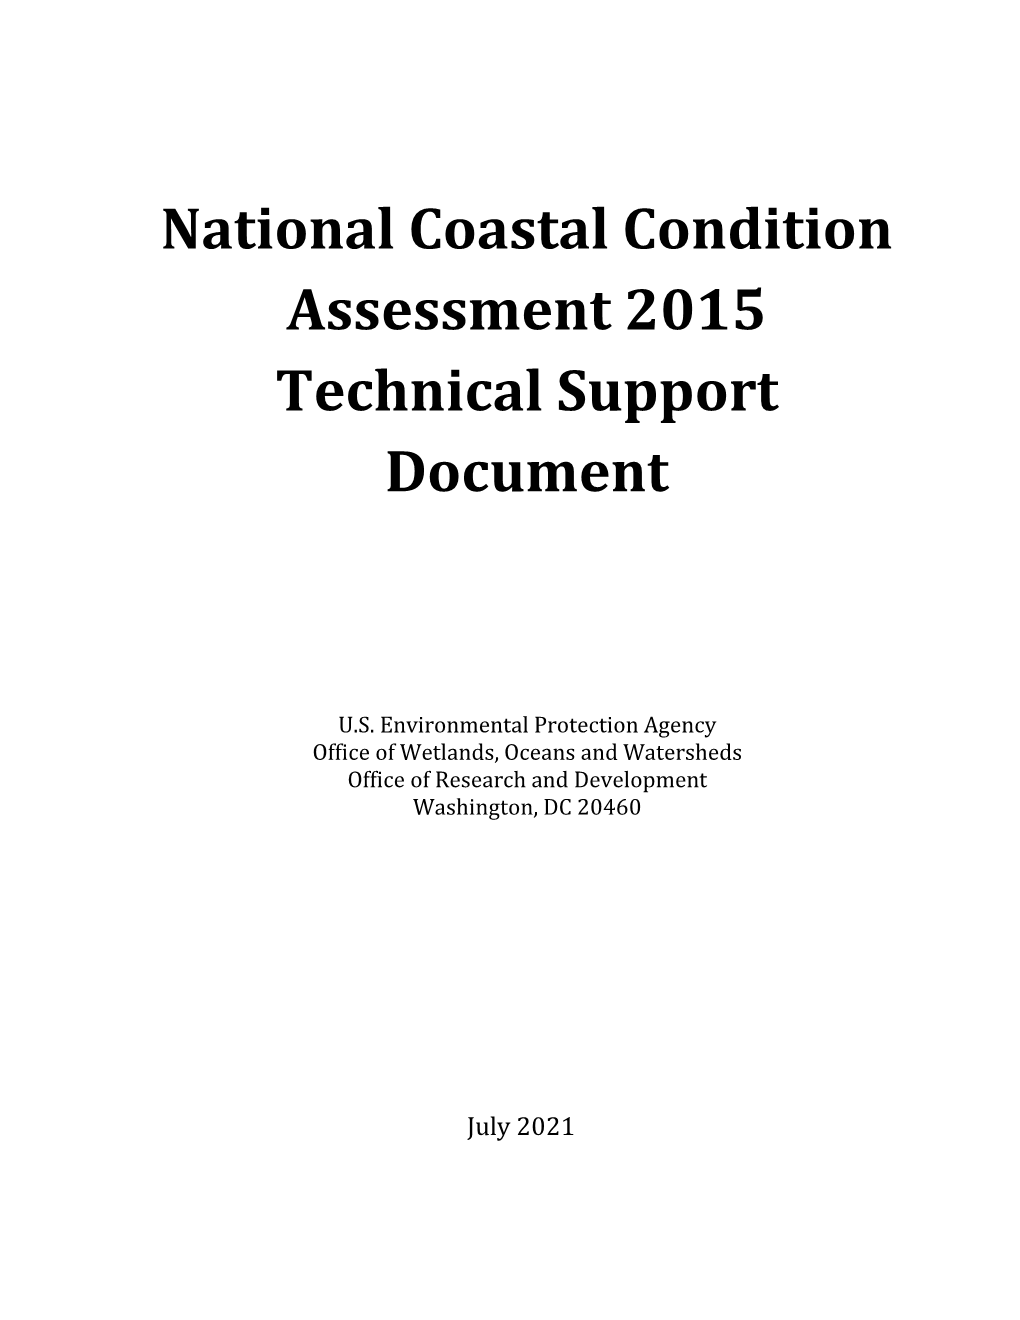 National Coastal Condition Assessment 2015 Technical Support Document